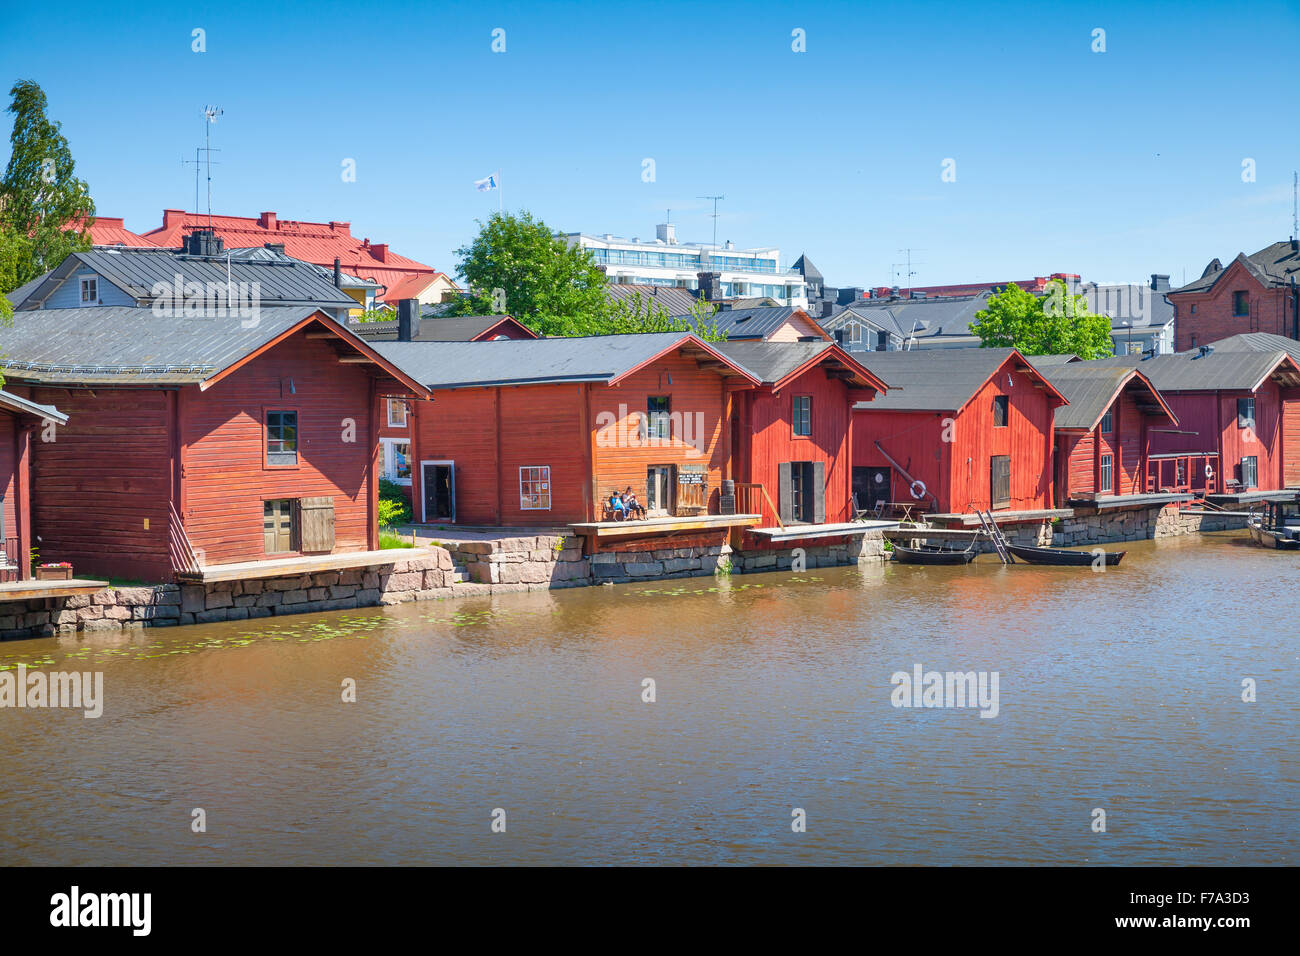 Porvoo, Finland - June 12, 2015: Old red wooden houses on the river coast, historical Finnish town Stock Photo